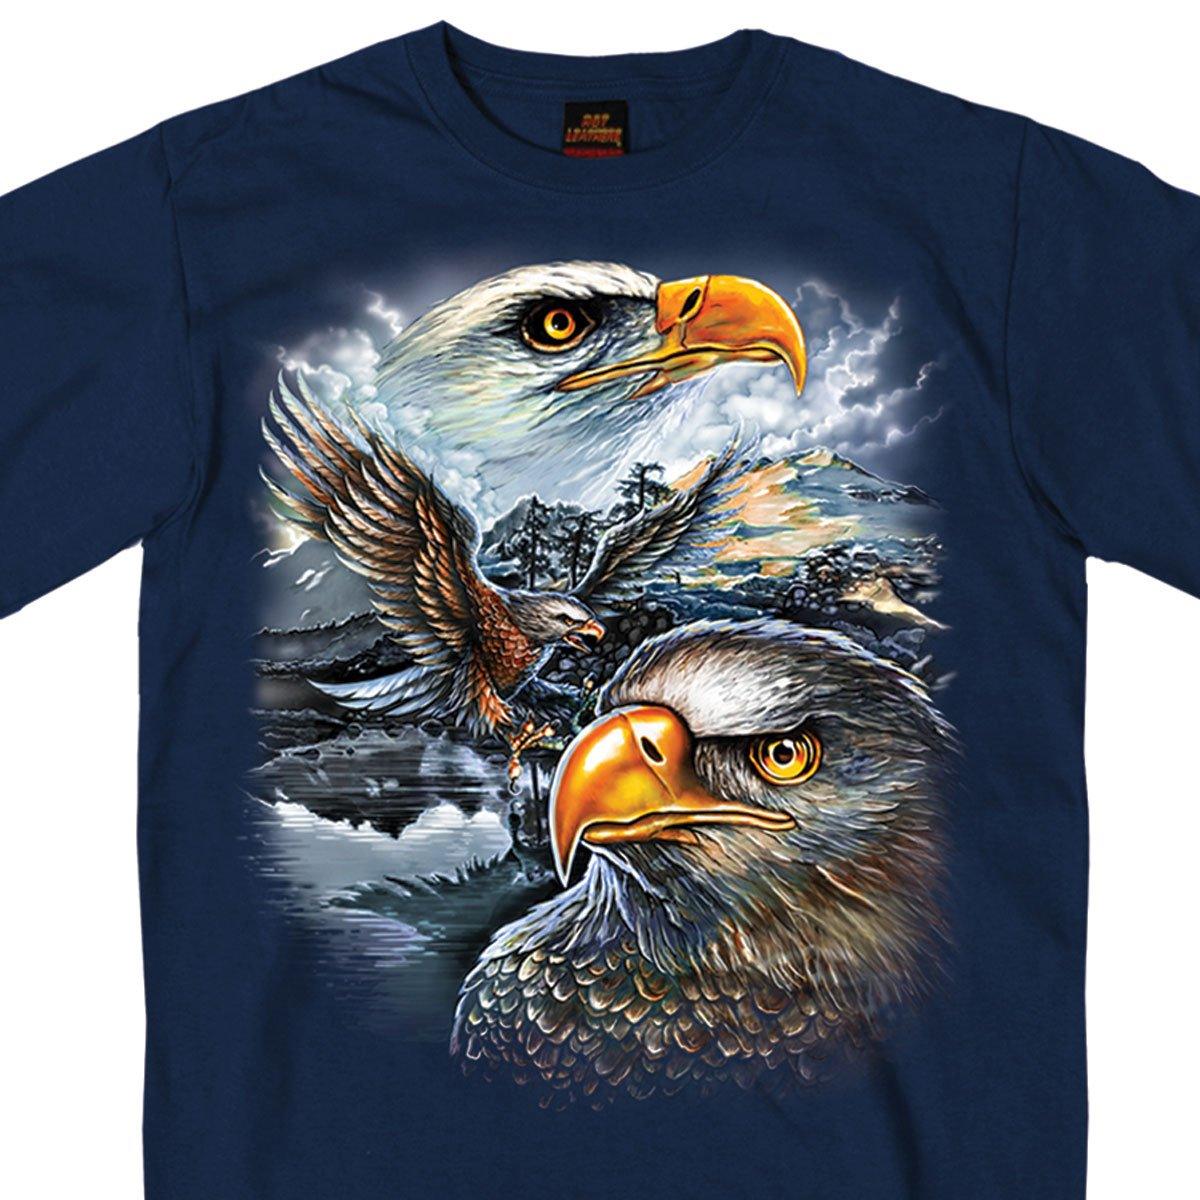 Hot Leathers Men's Majestic Eagle T-Shirt, Navy Blue - American Legend Rider